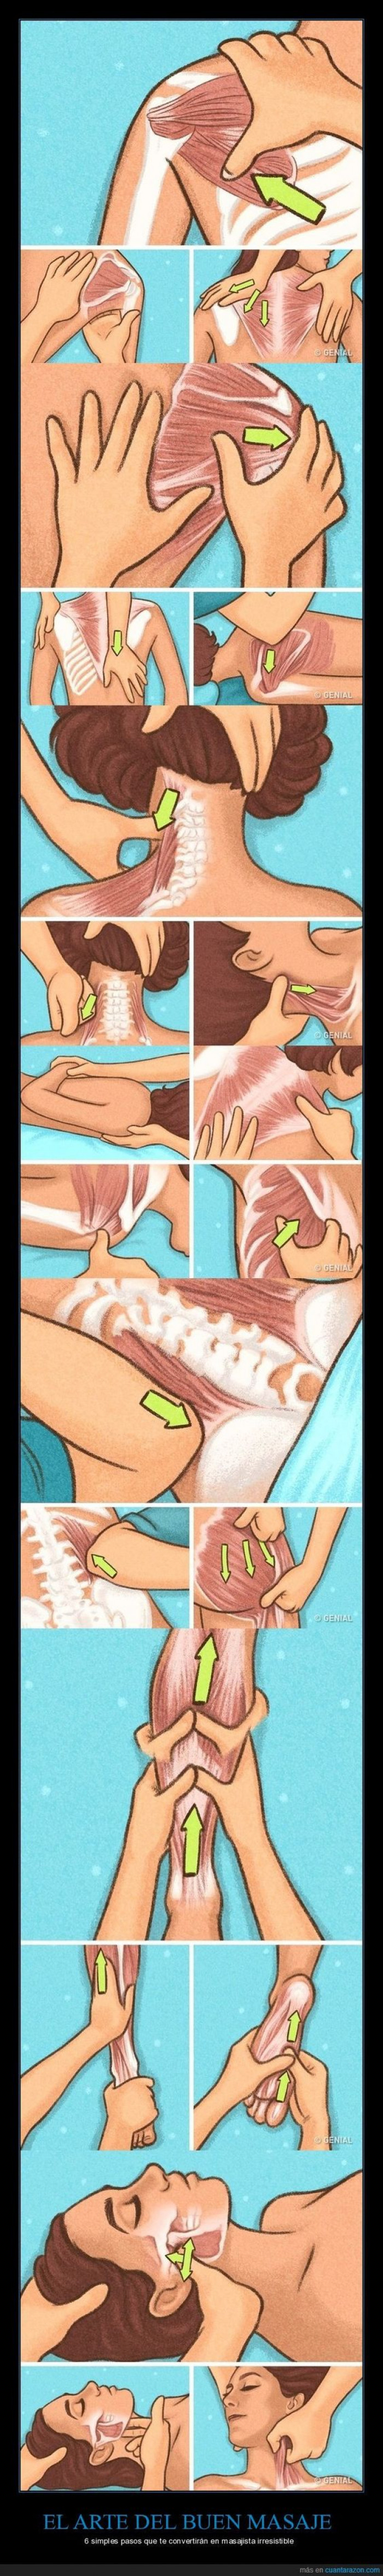 How To Massage Properly